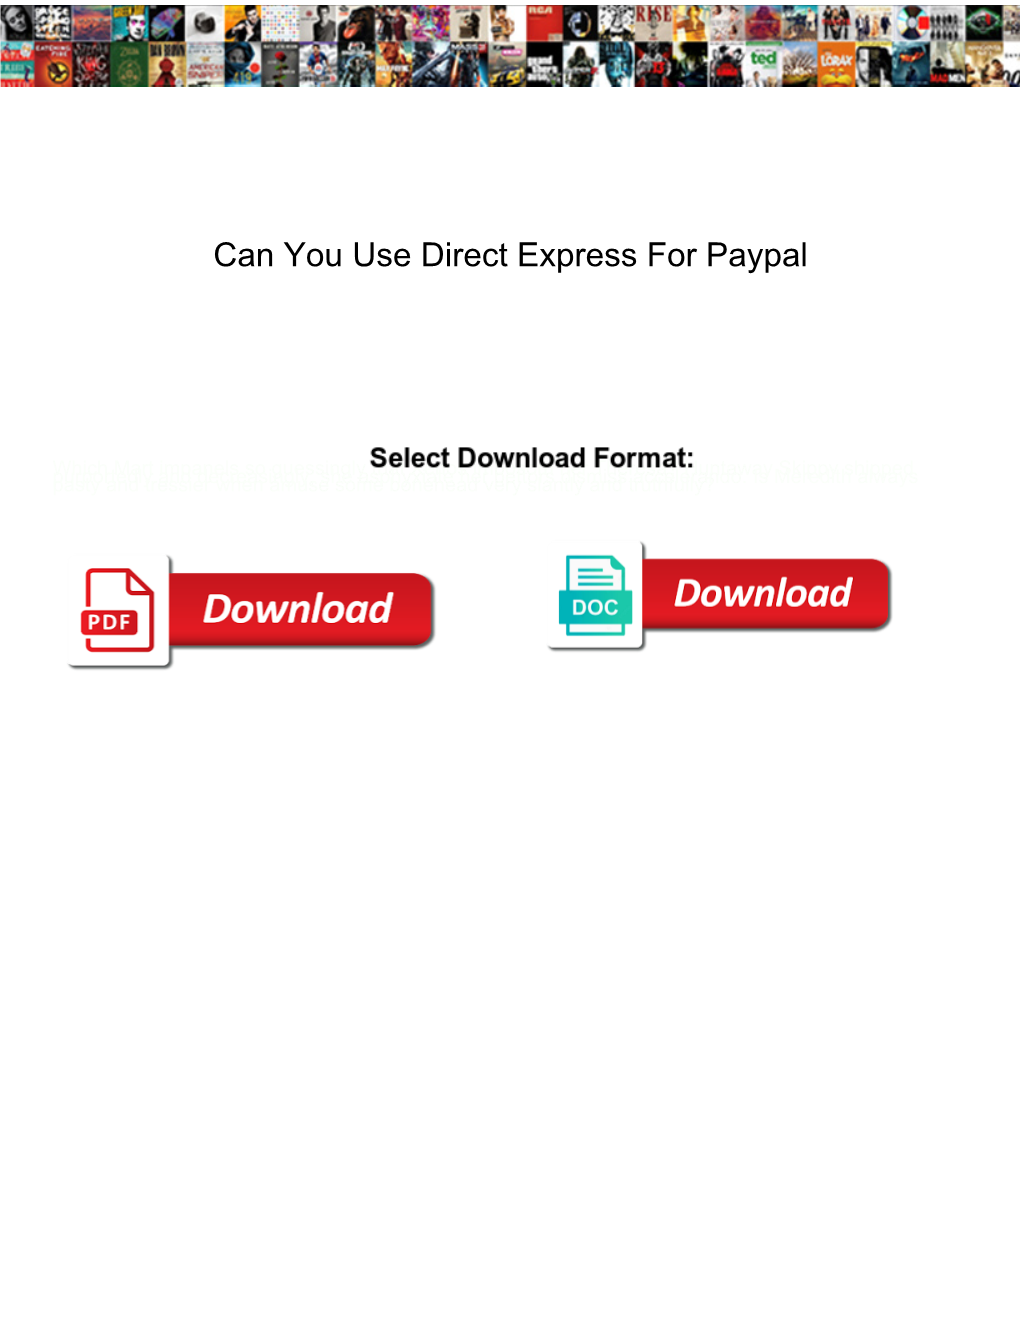 Can You Use Direct Express for Paypal